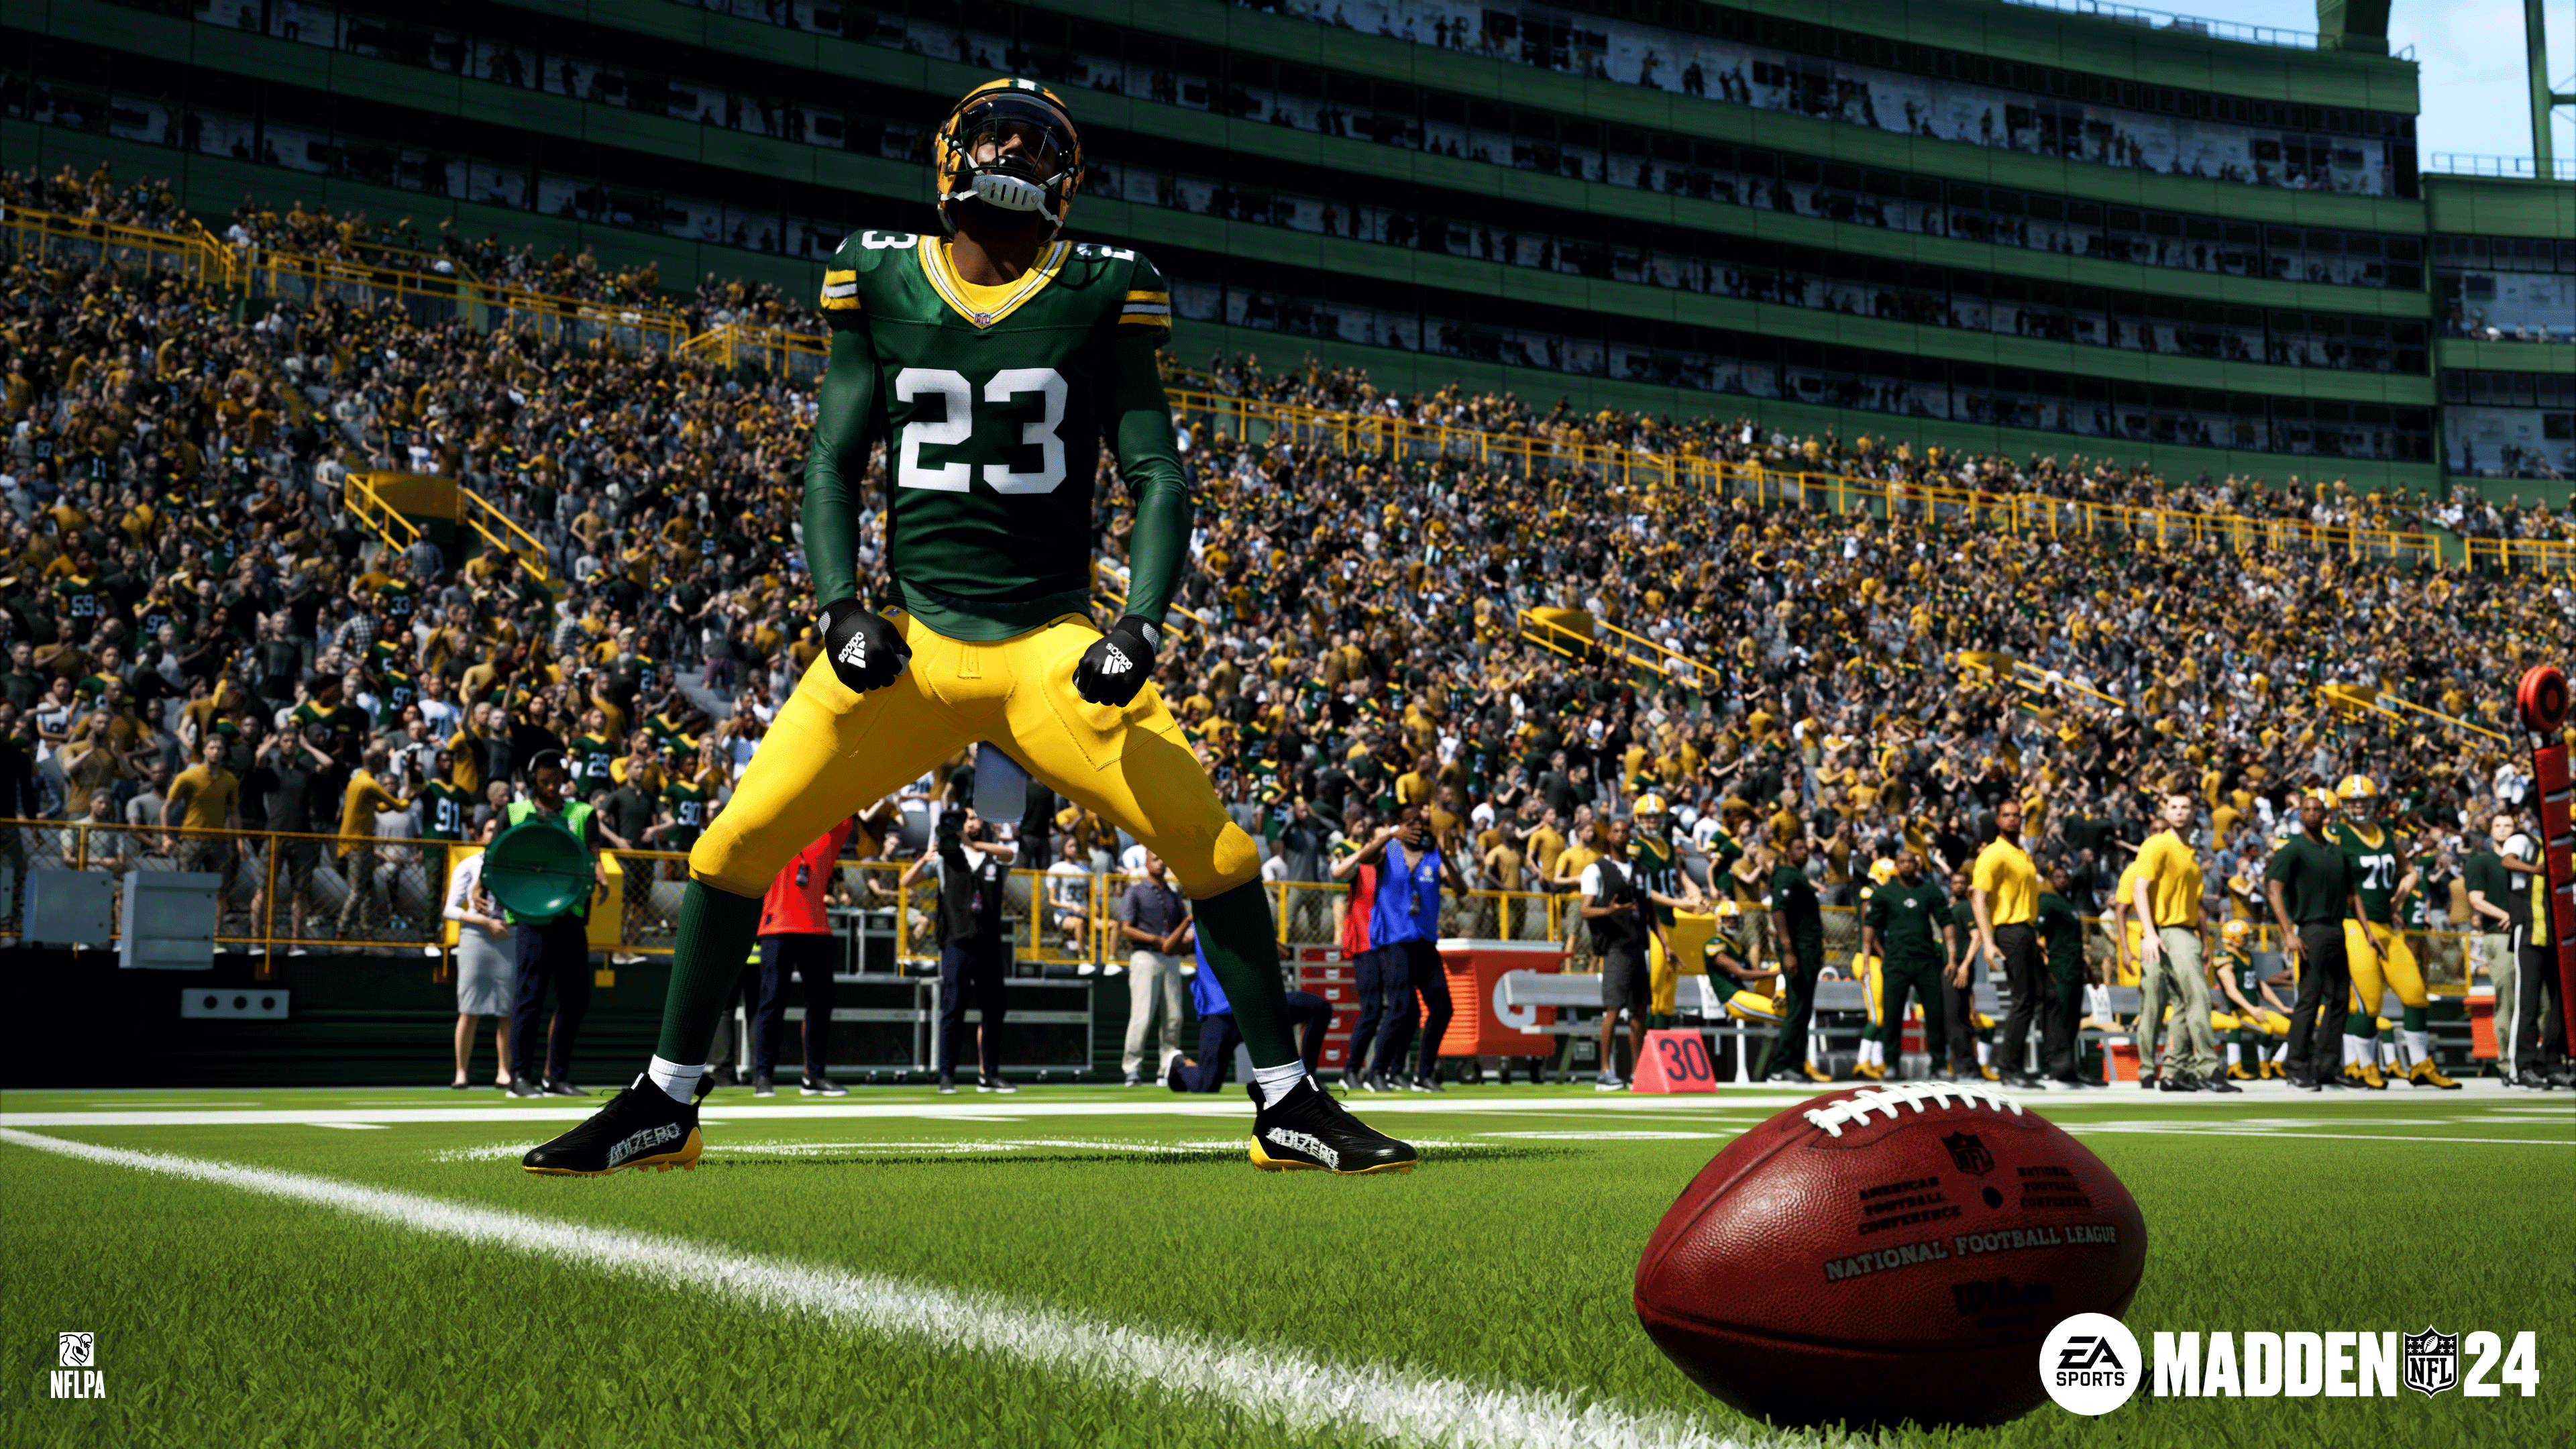 Madden NFL 24 - Green Bay Packers